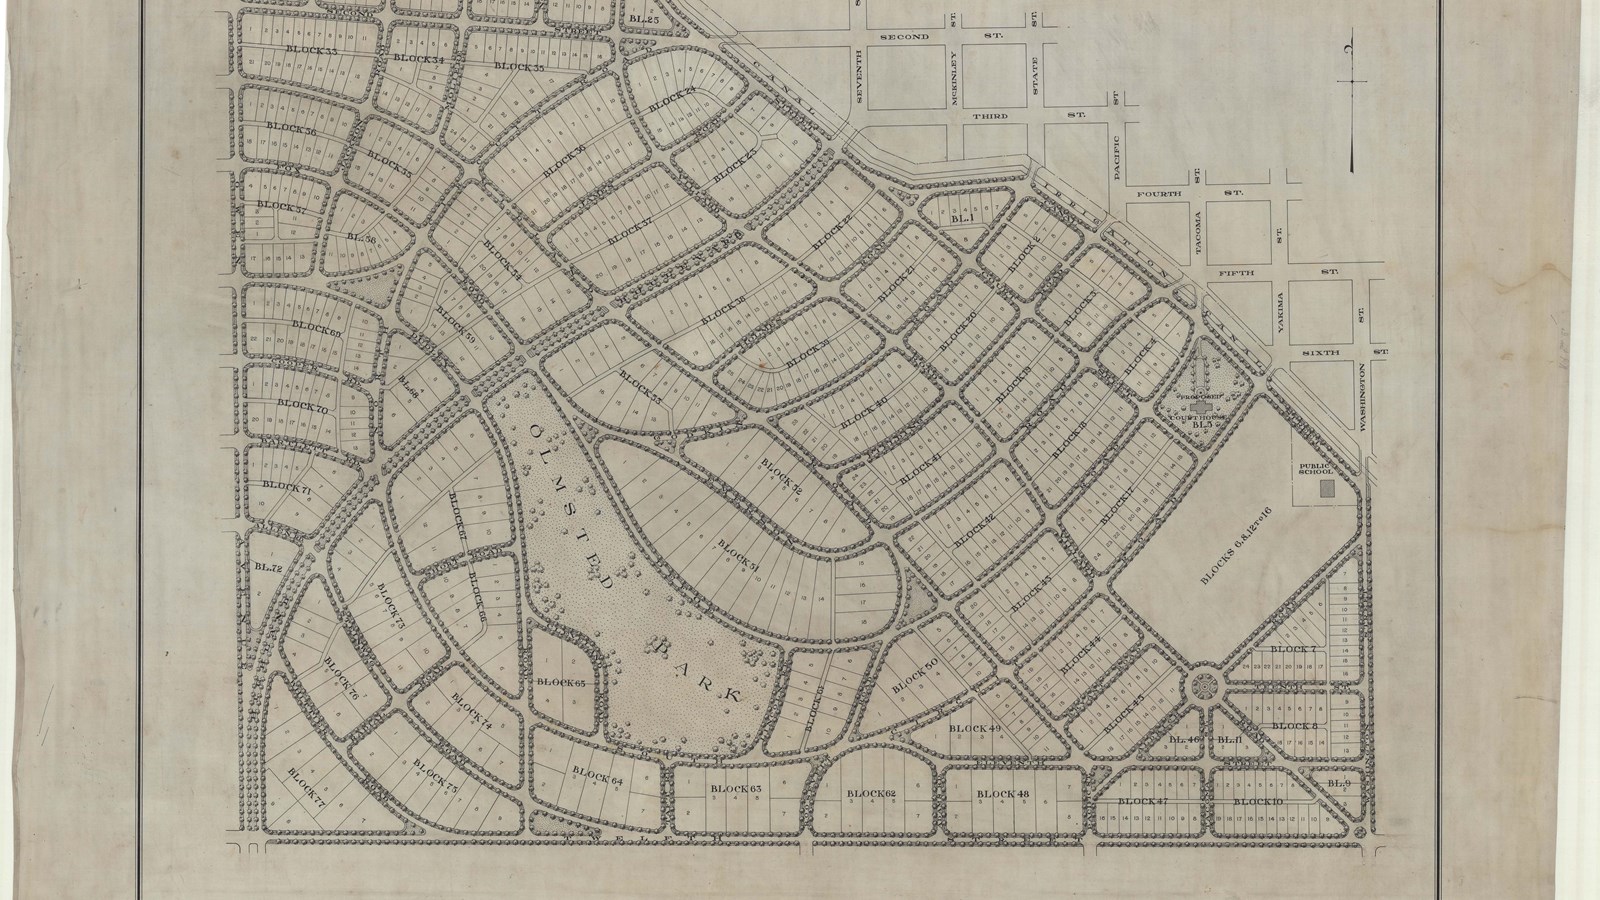 Plan of suburban community with tree lined curving roads and lots of lots for homes